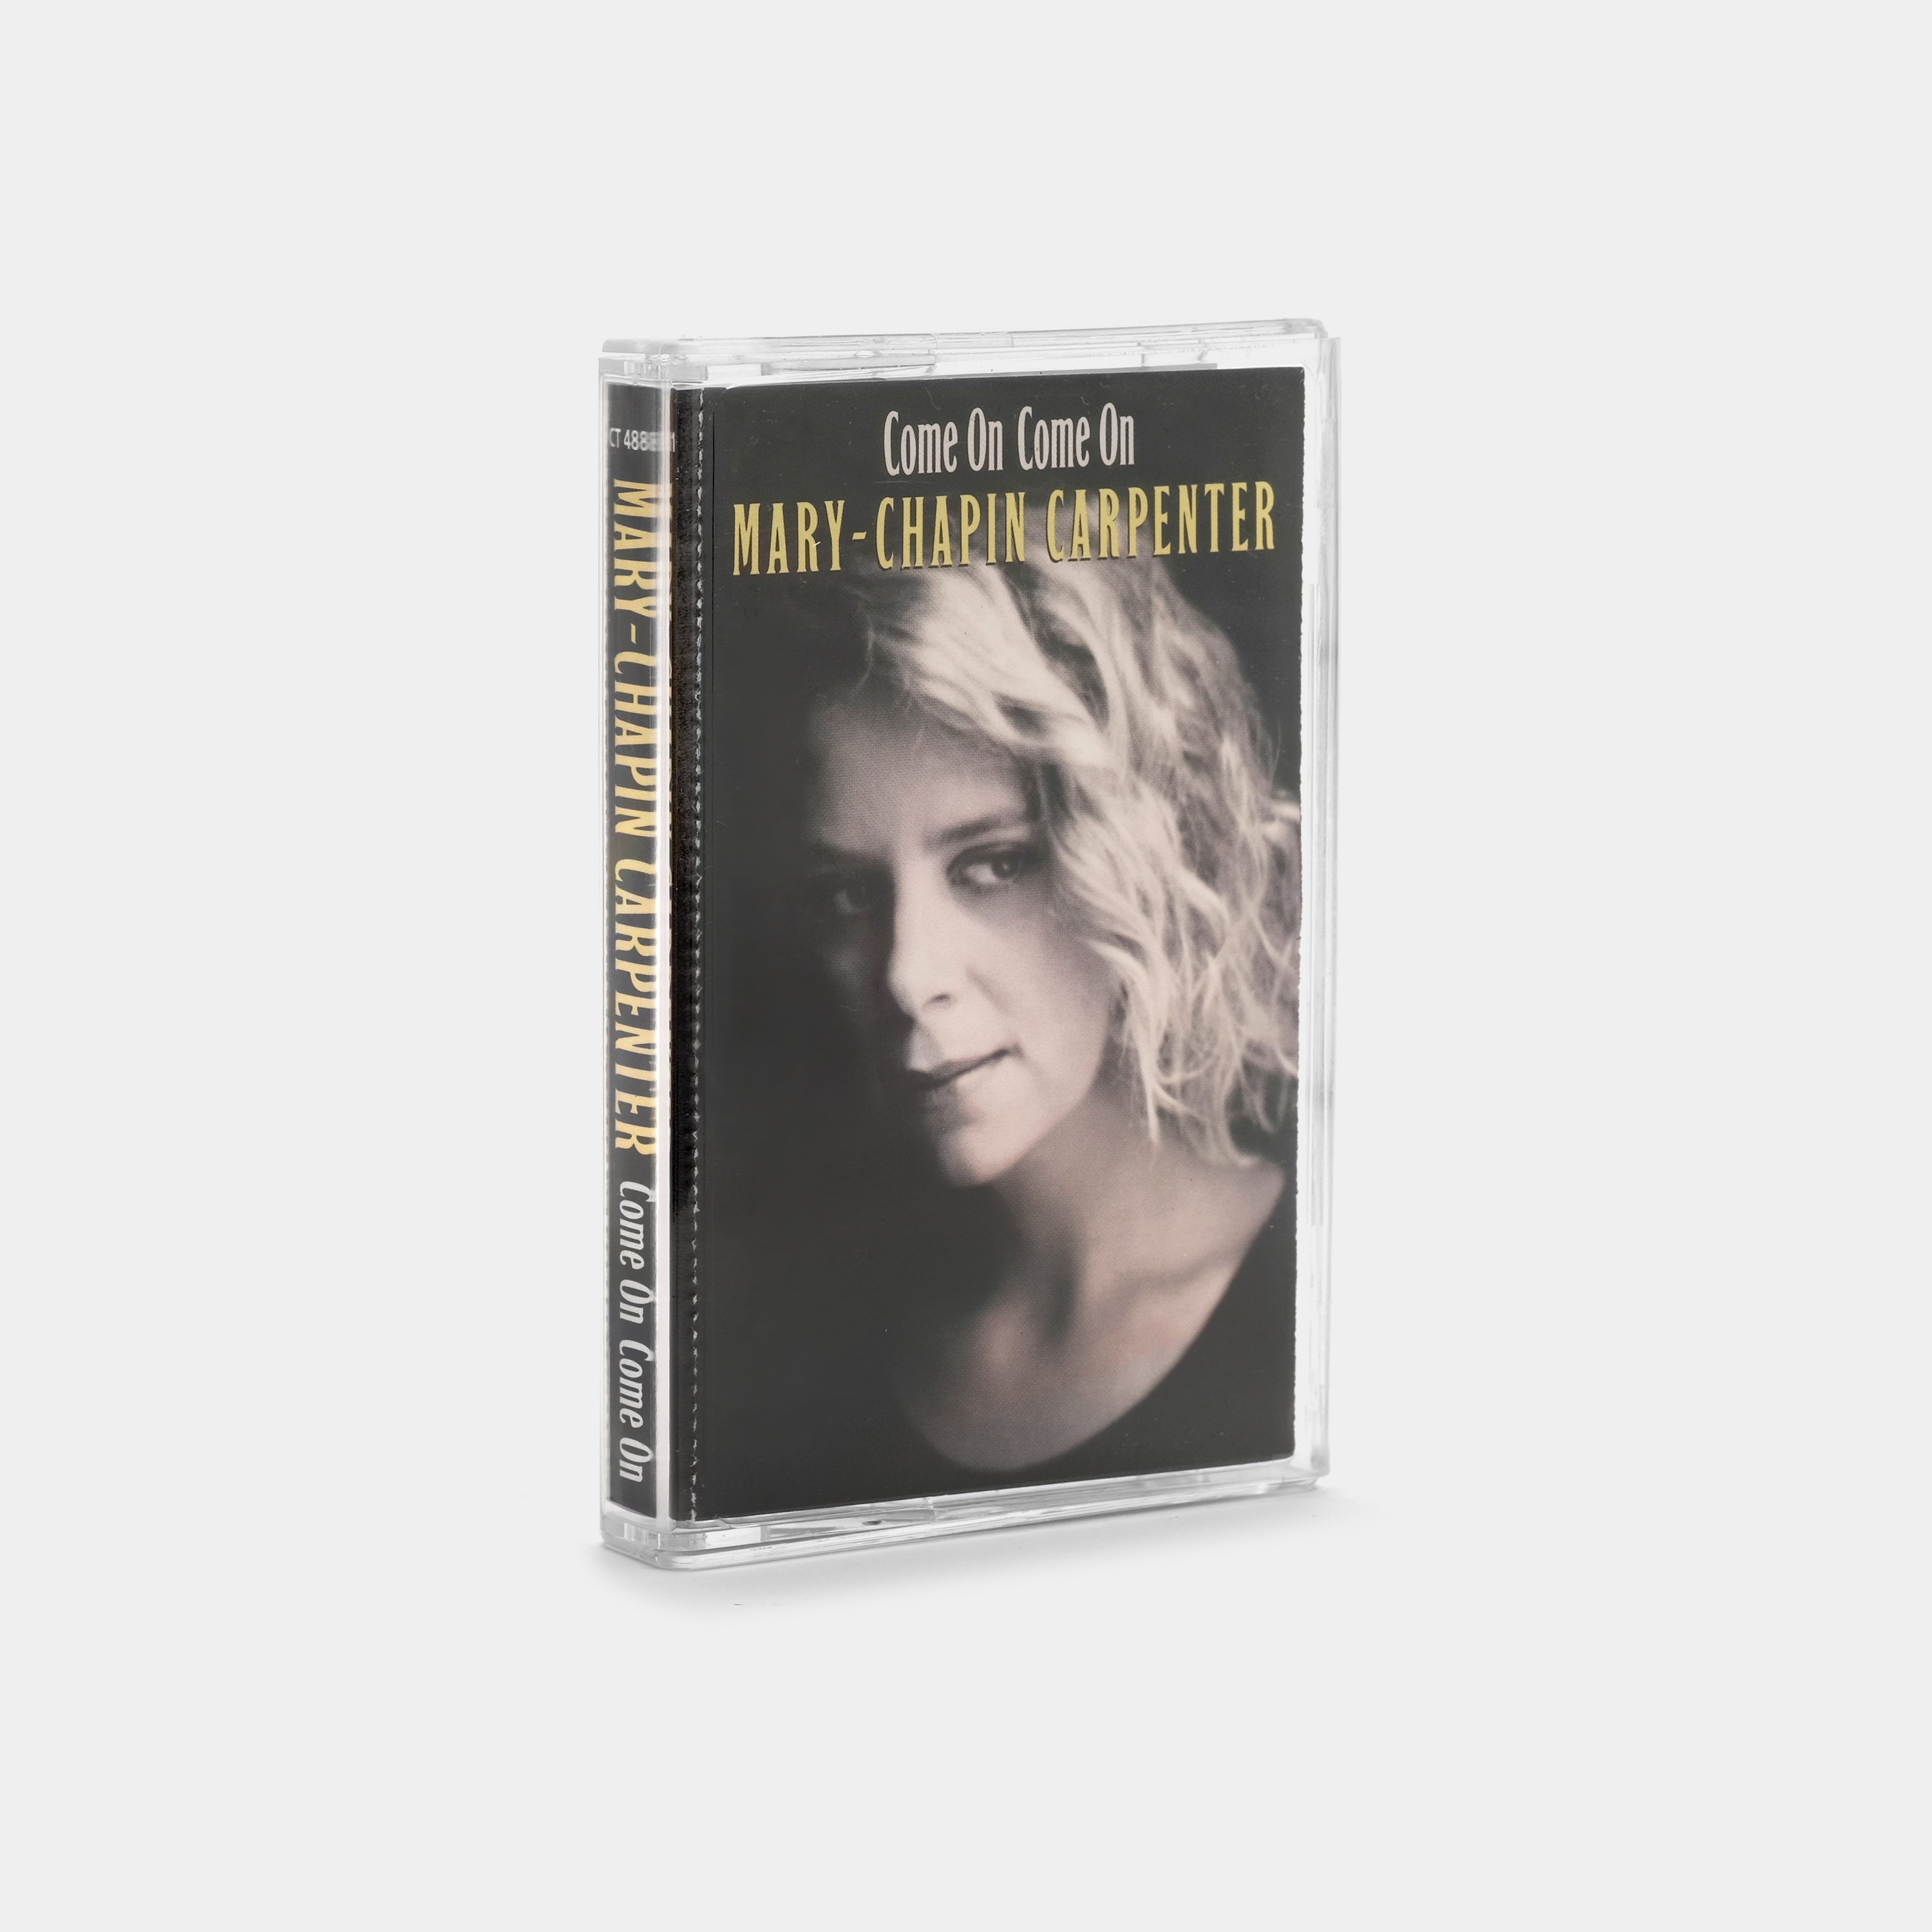 Mary-Chapin Carpenter - Come On Come On Cassette Tape